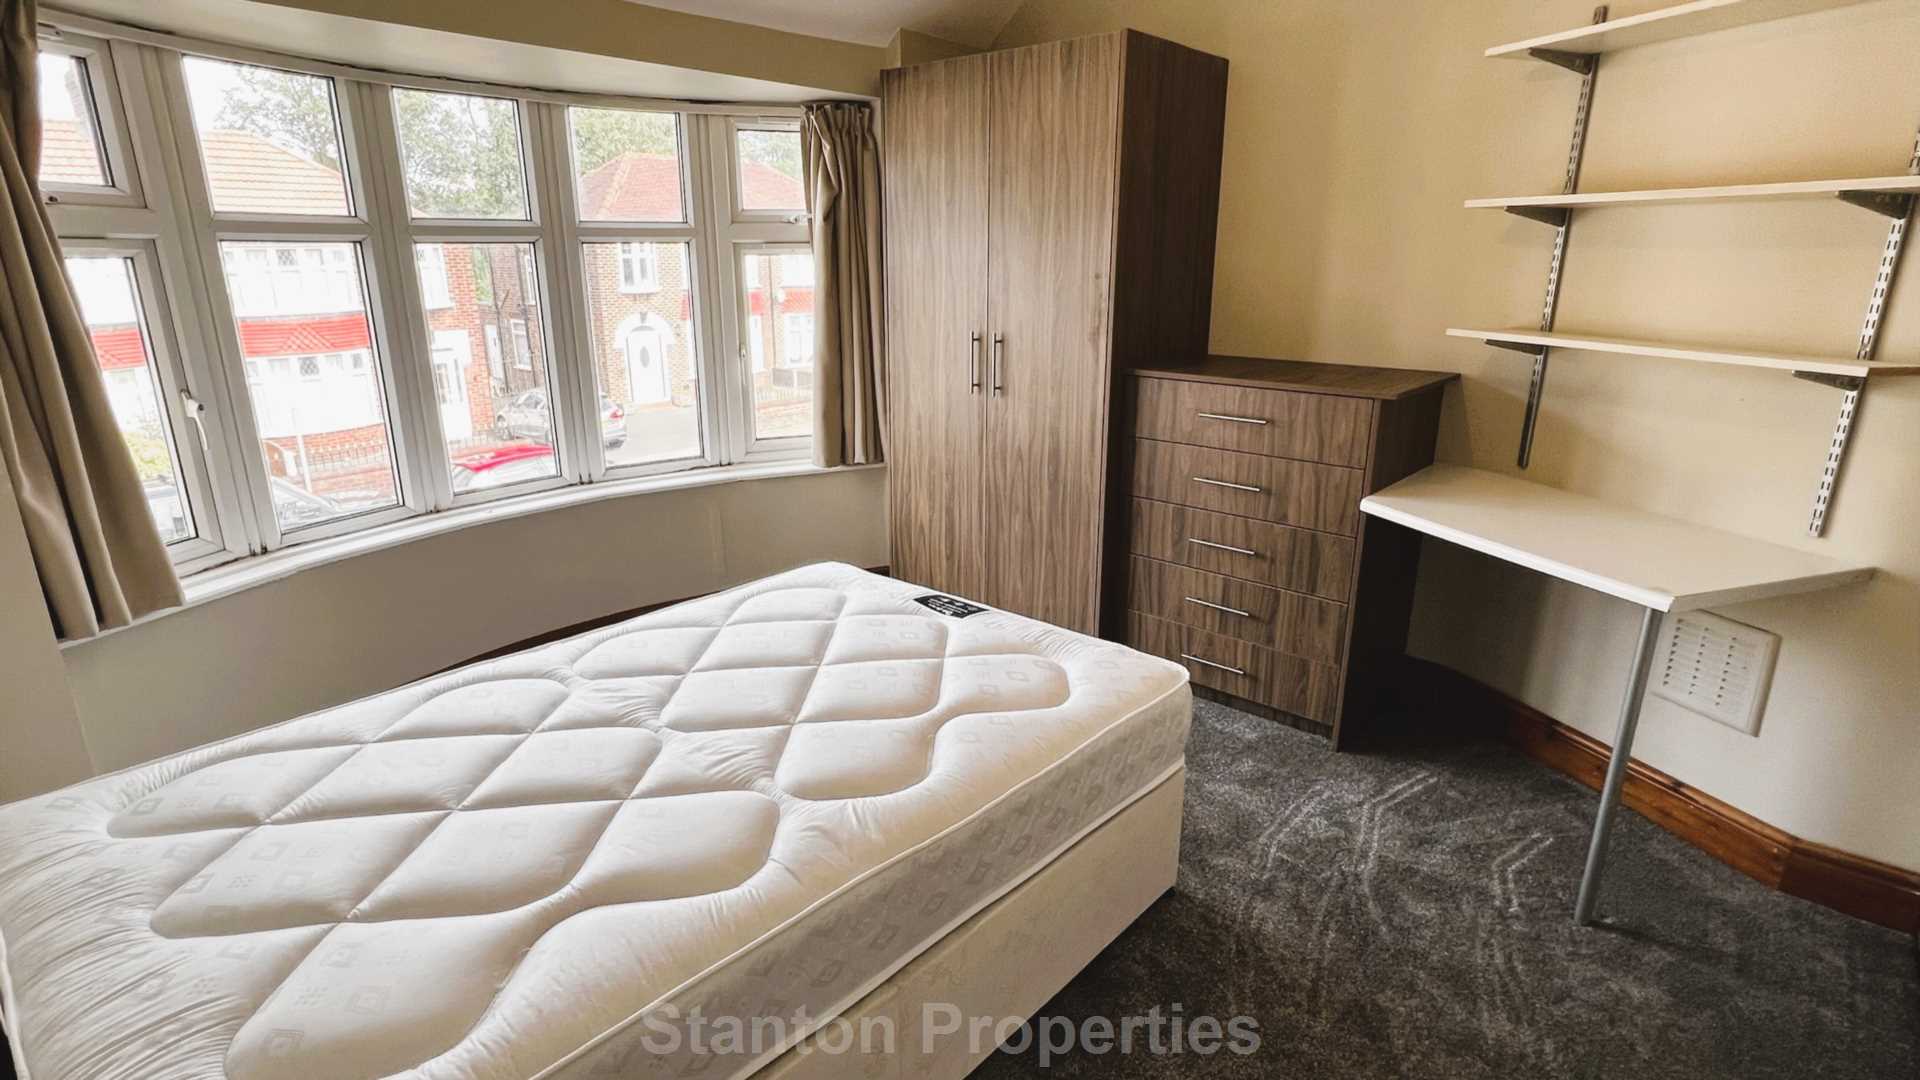 £120 pppw, Arnfield Road, Withington, Image 11